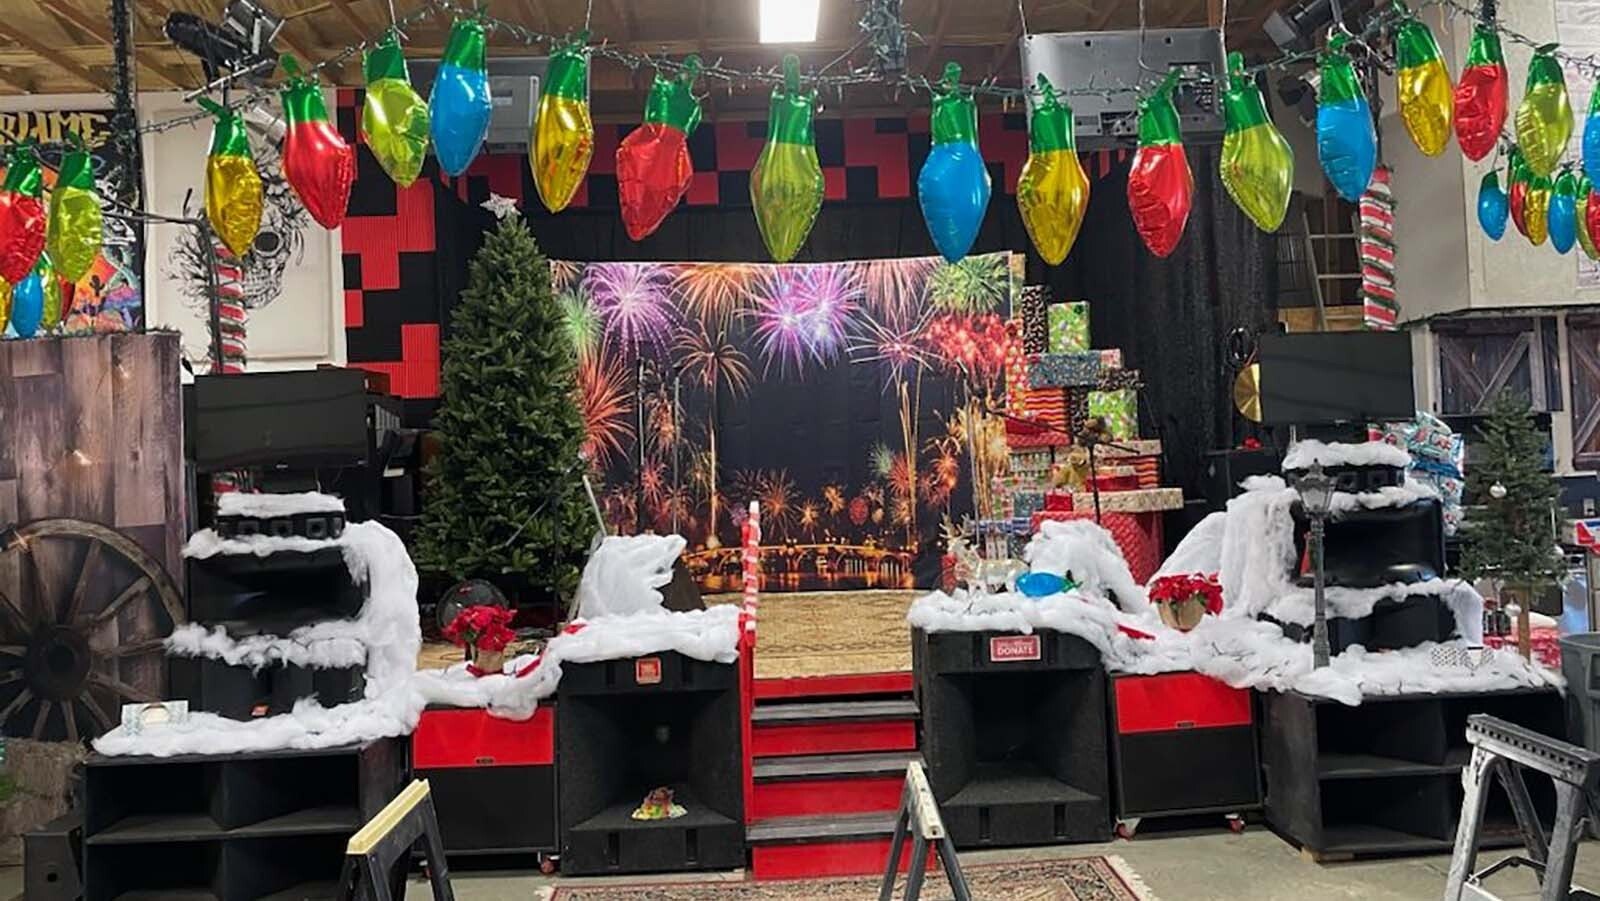 The holidays were busy on the soundstage at Rock and Roll Ranch.